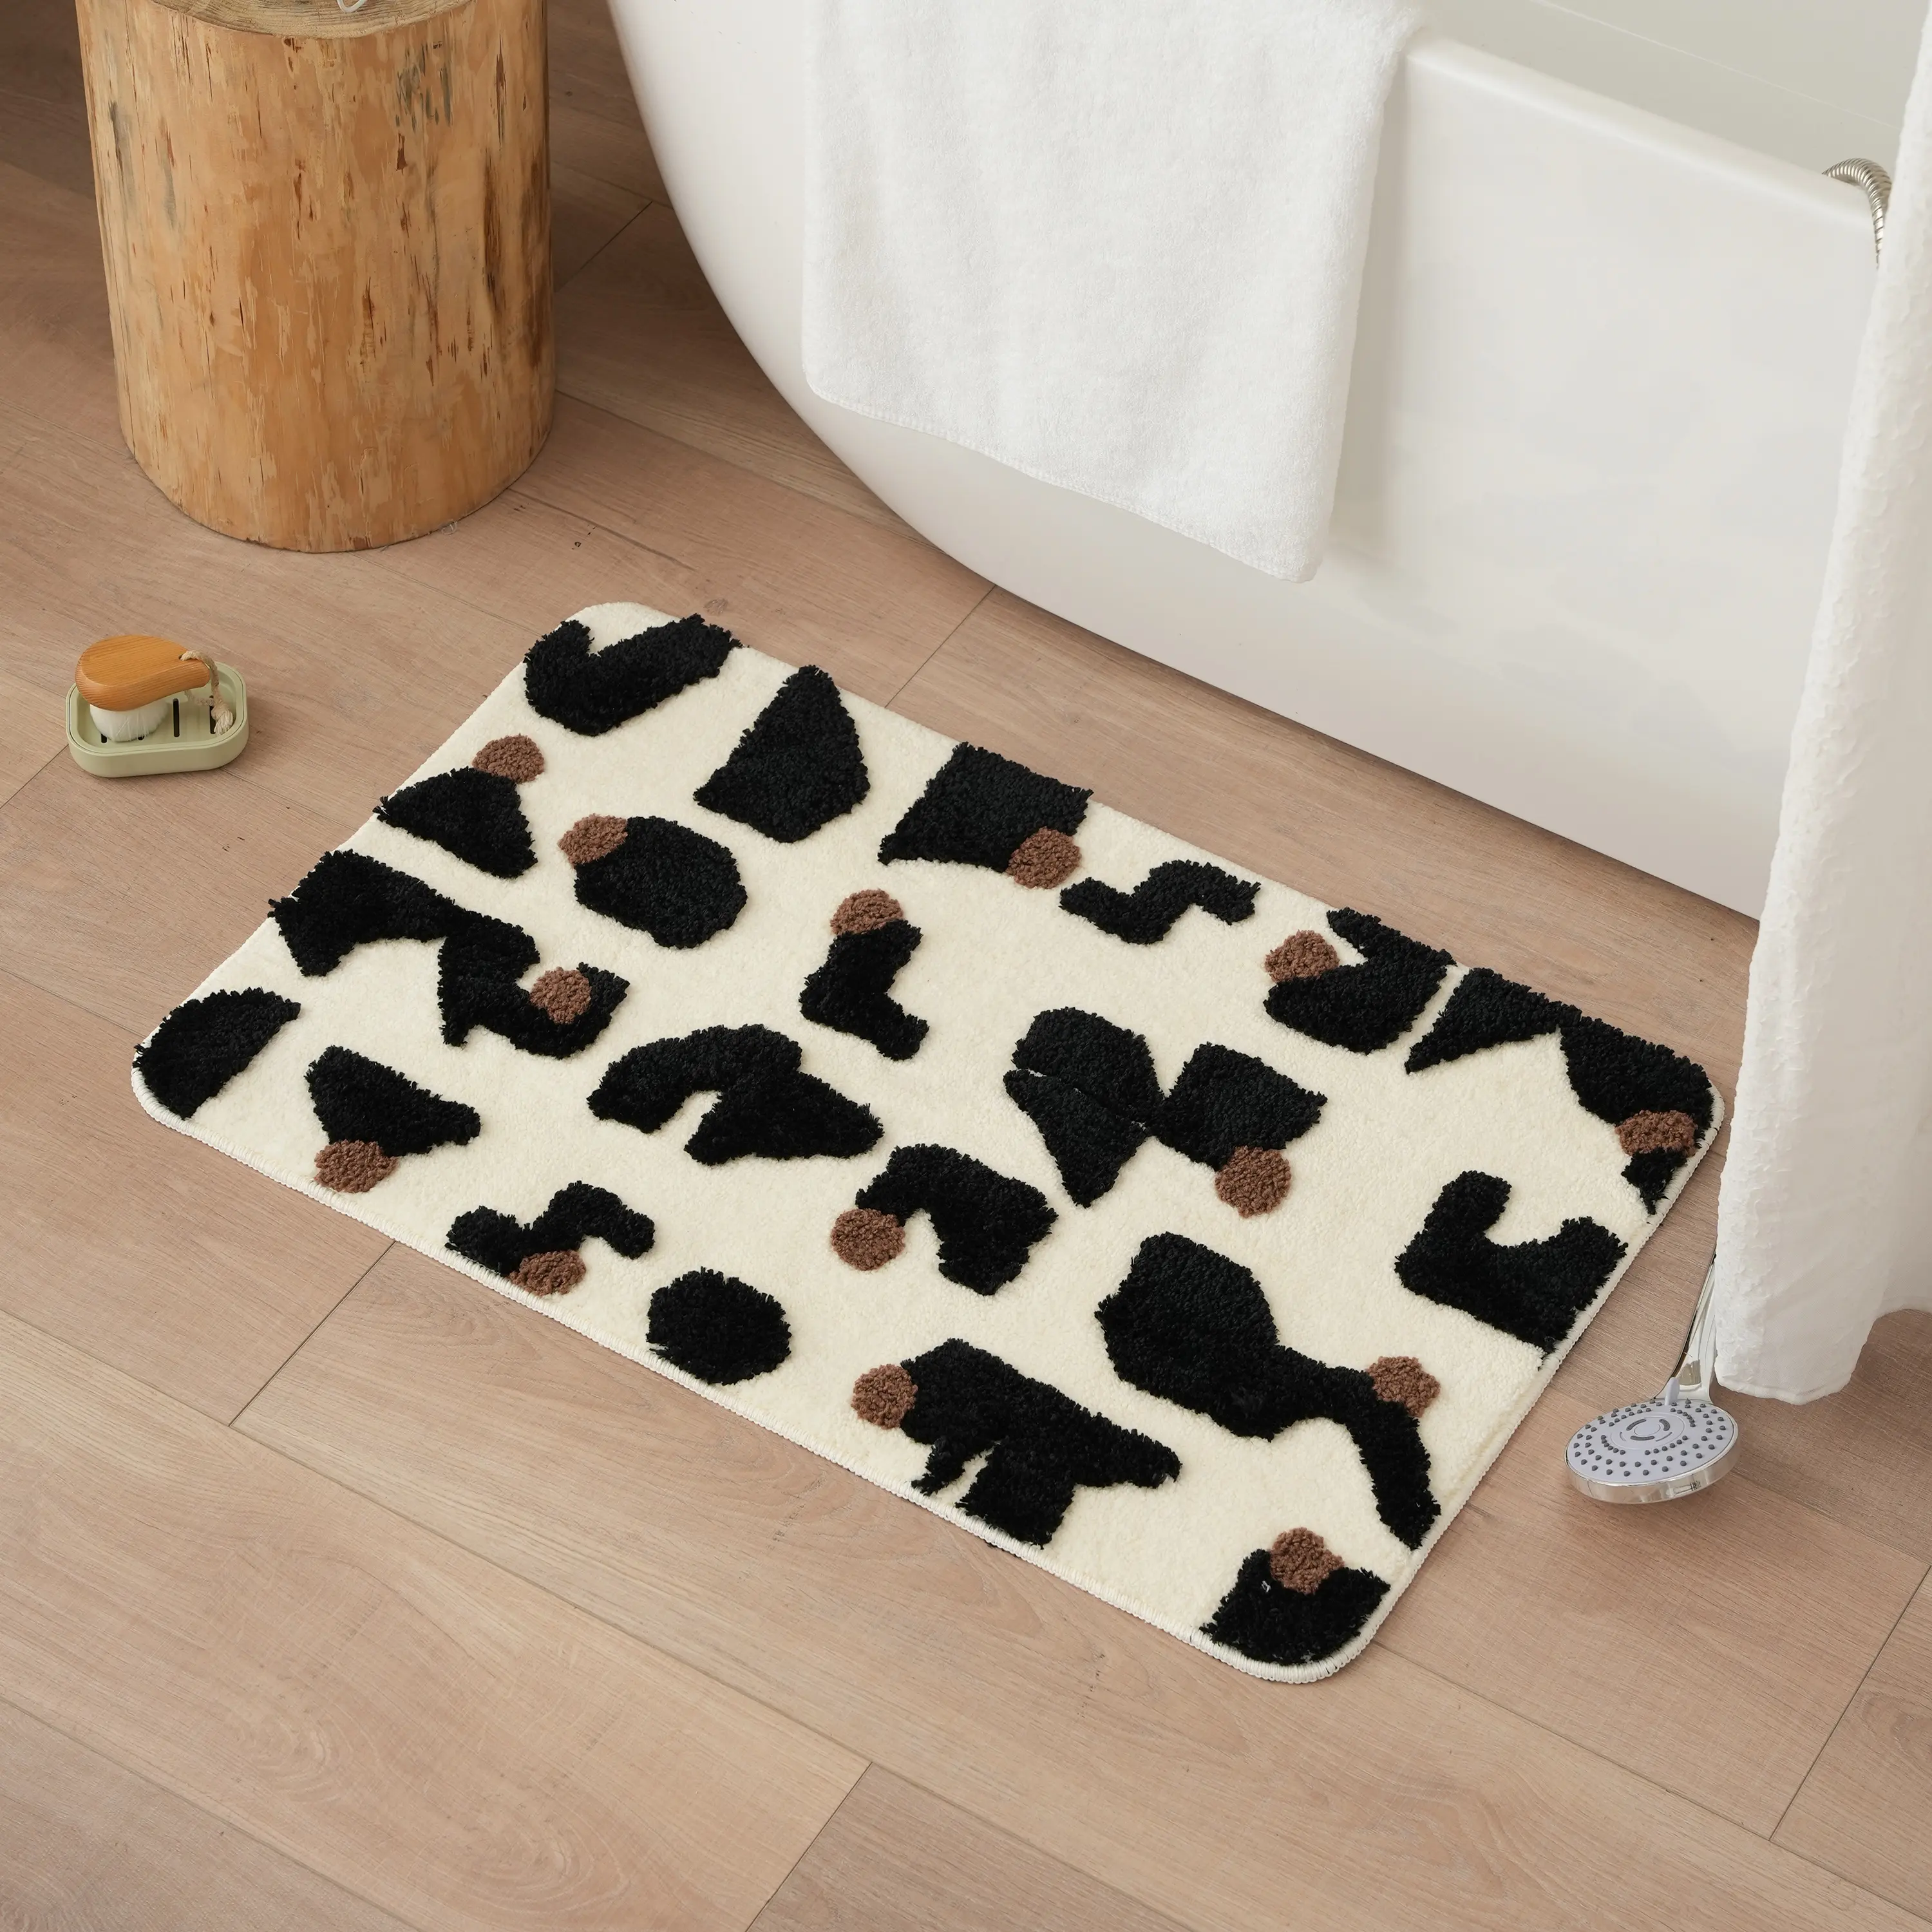 3D Handmade Tufted Modern Non-Slip Absorbent Thick Plush Extra Soft Shaggy Bath Mat Floor Mat Dry Fast Machine Washable Rugs